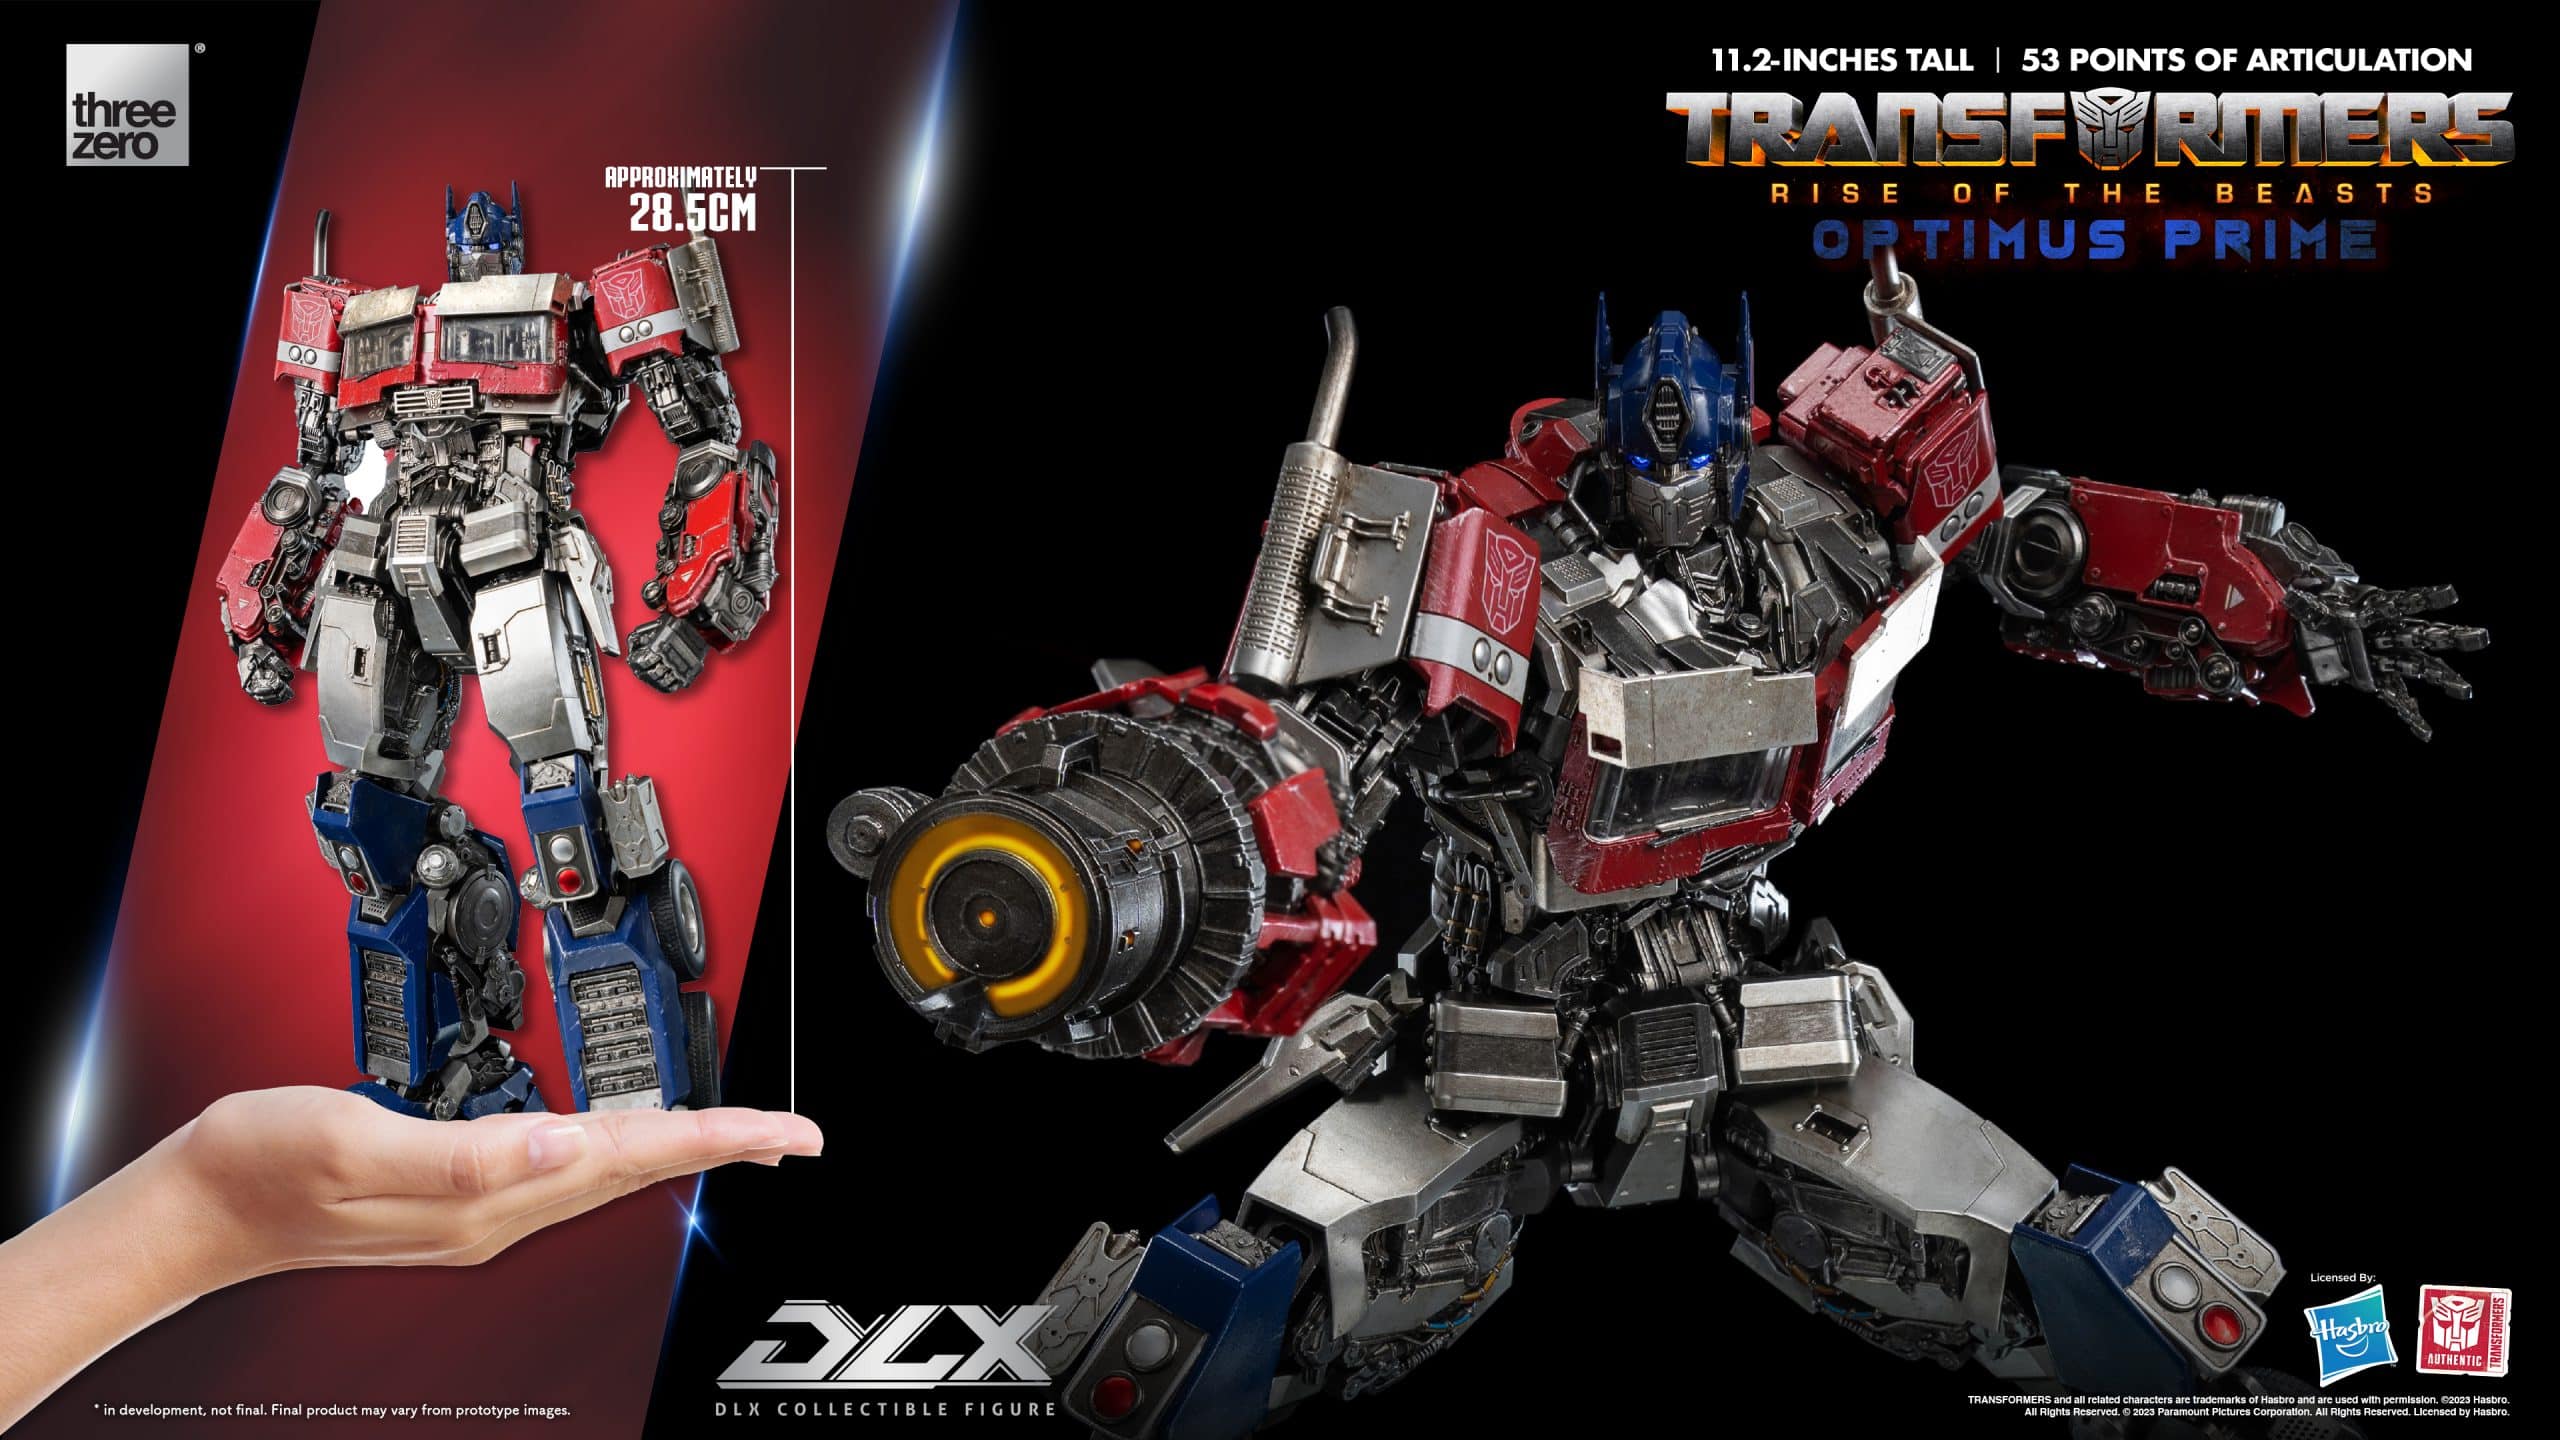 DLX_Transformers_Rise-Of-The-Beasts_Optimus-Prime_99-scale